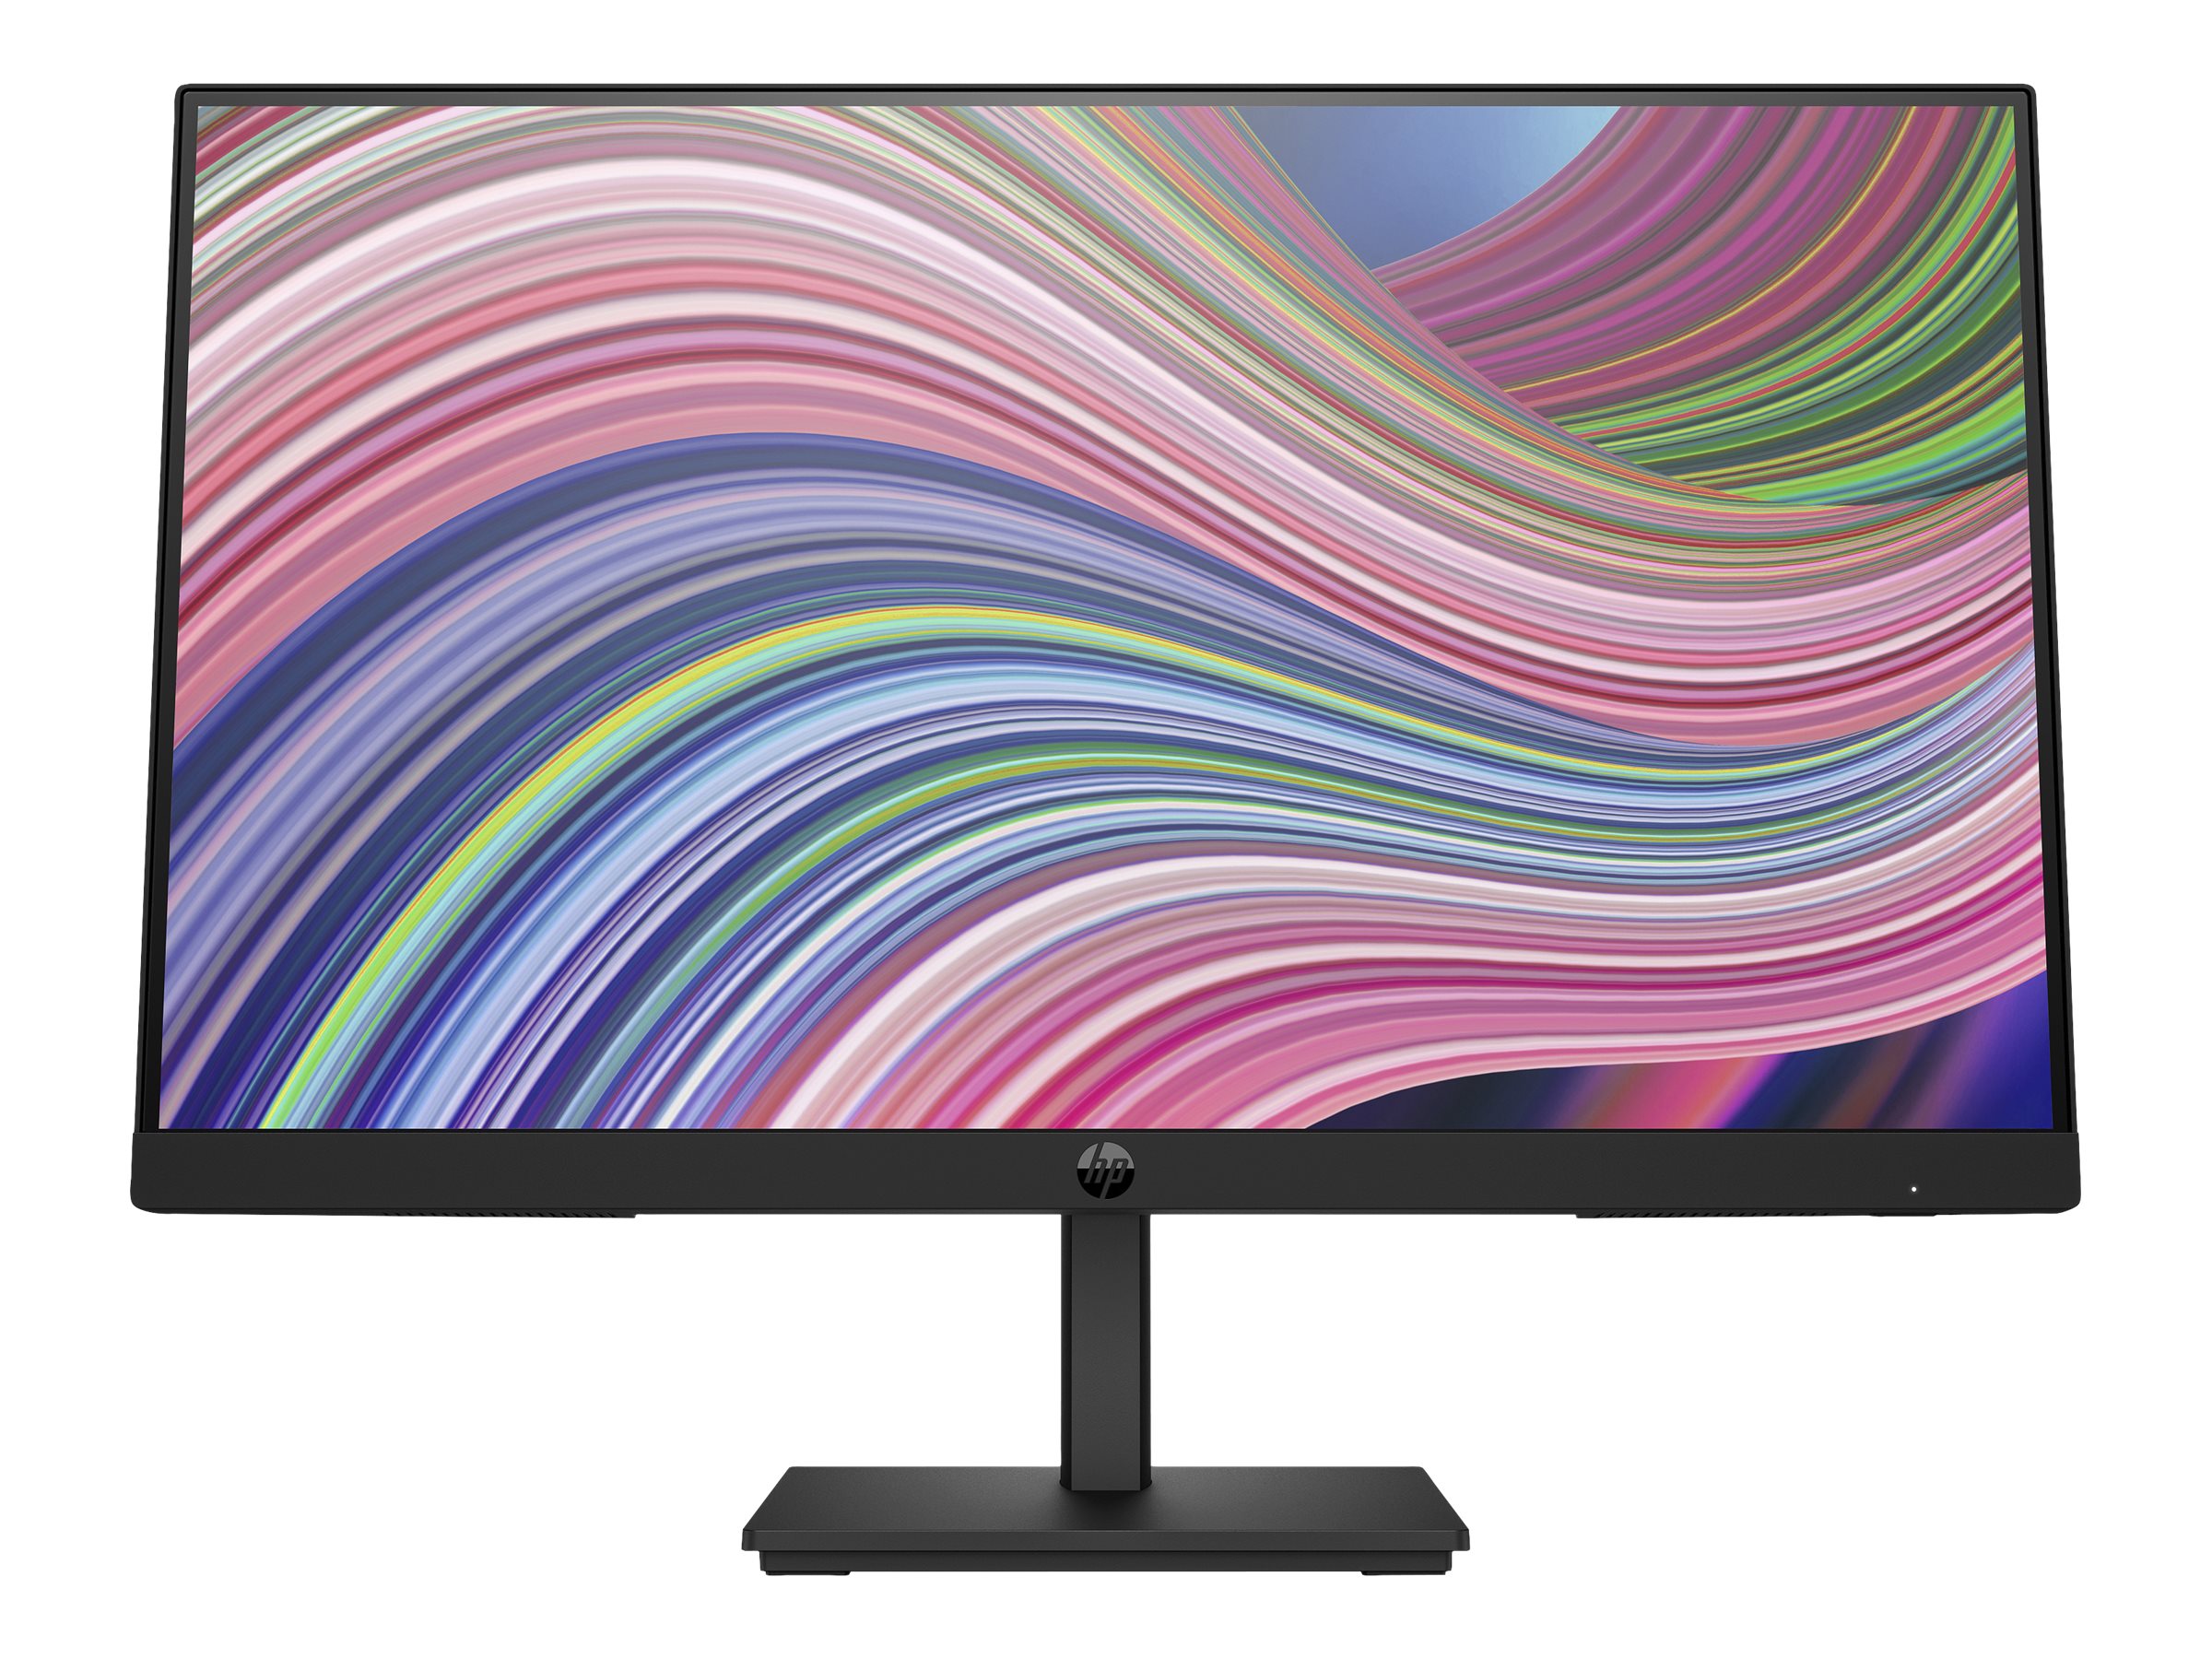 Buy 21.5" P22 G5 Full HD LED-LCD Monitor at Connection Public Sector Solutions